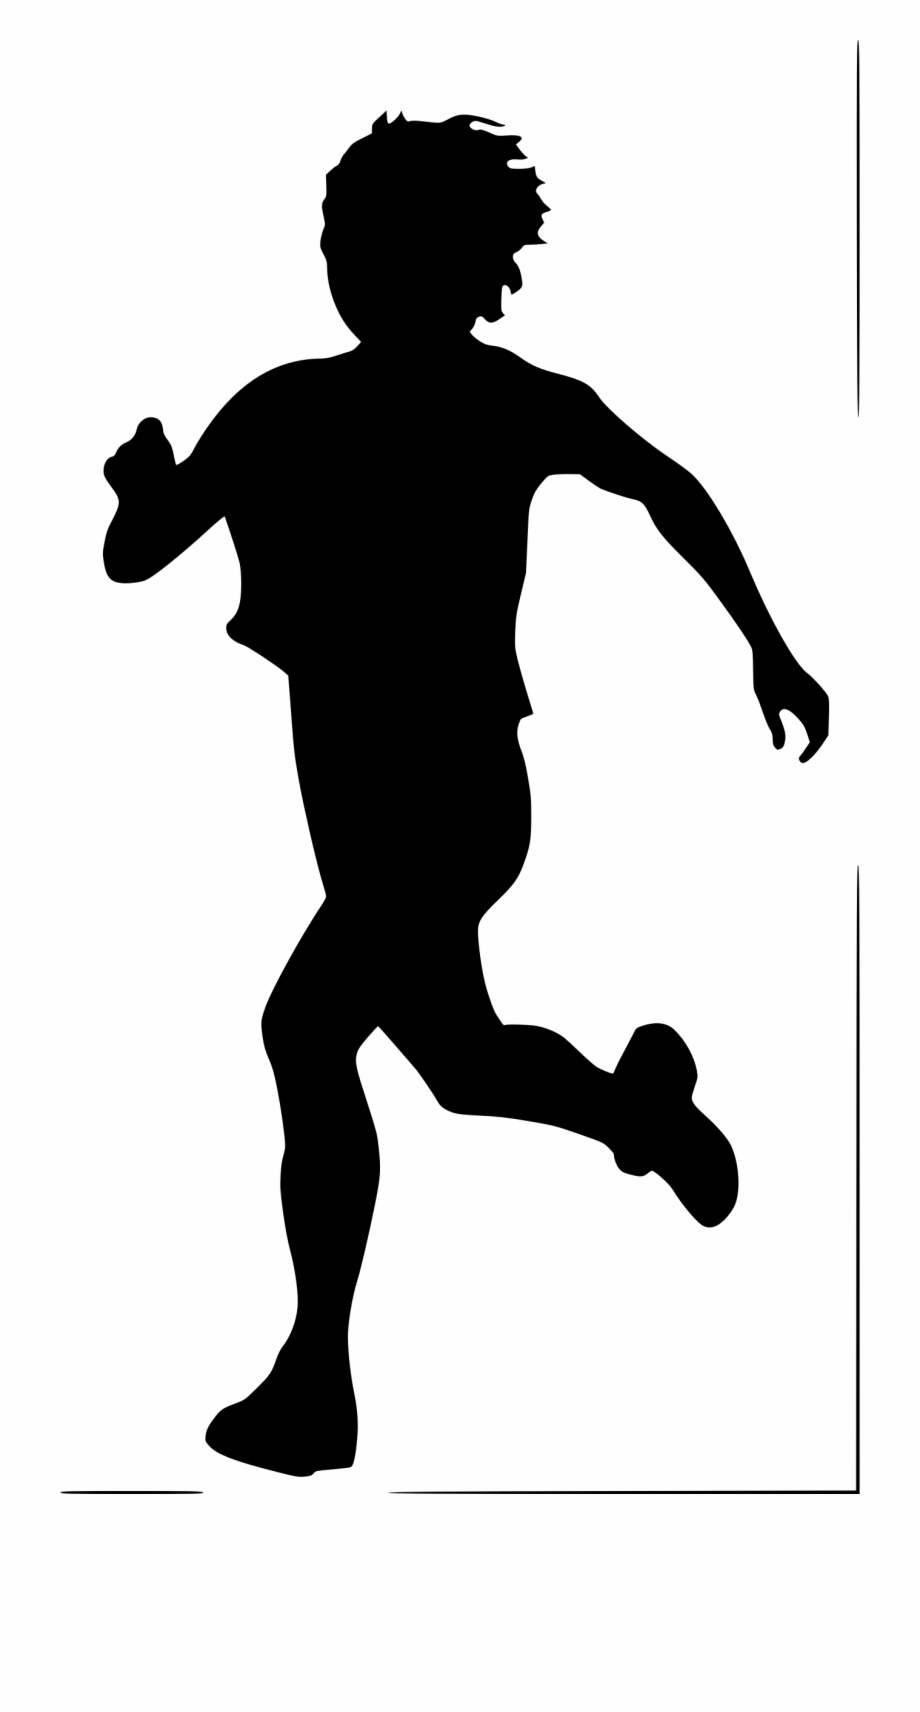 Image Black And White Download Silhouette People Running